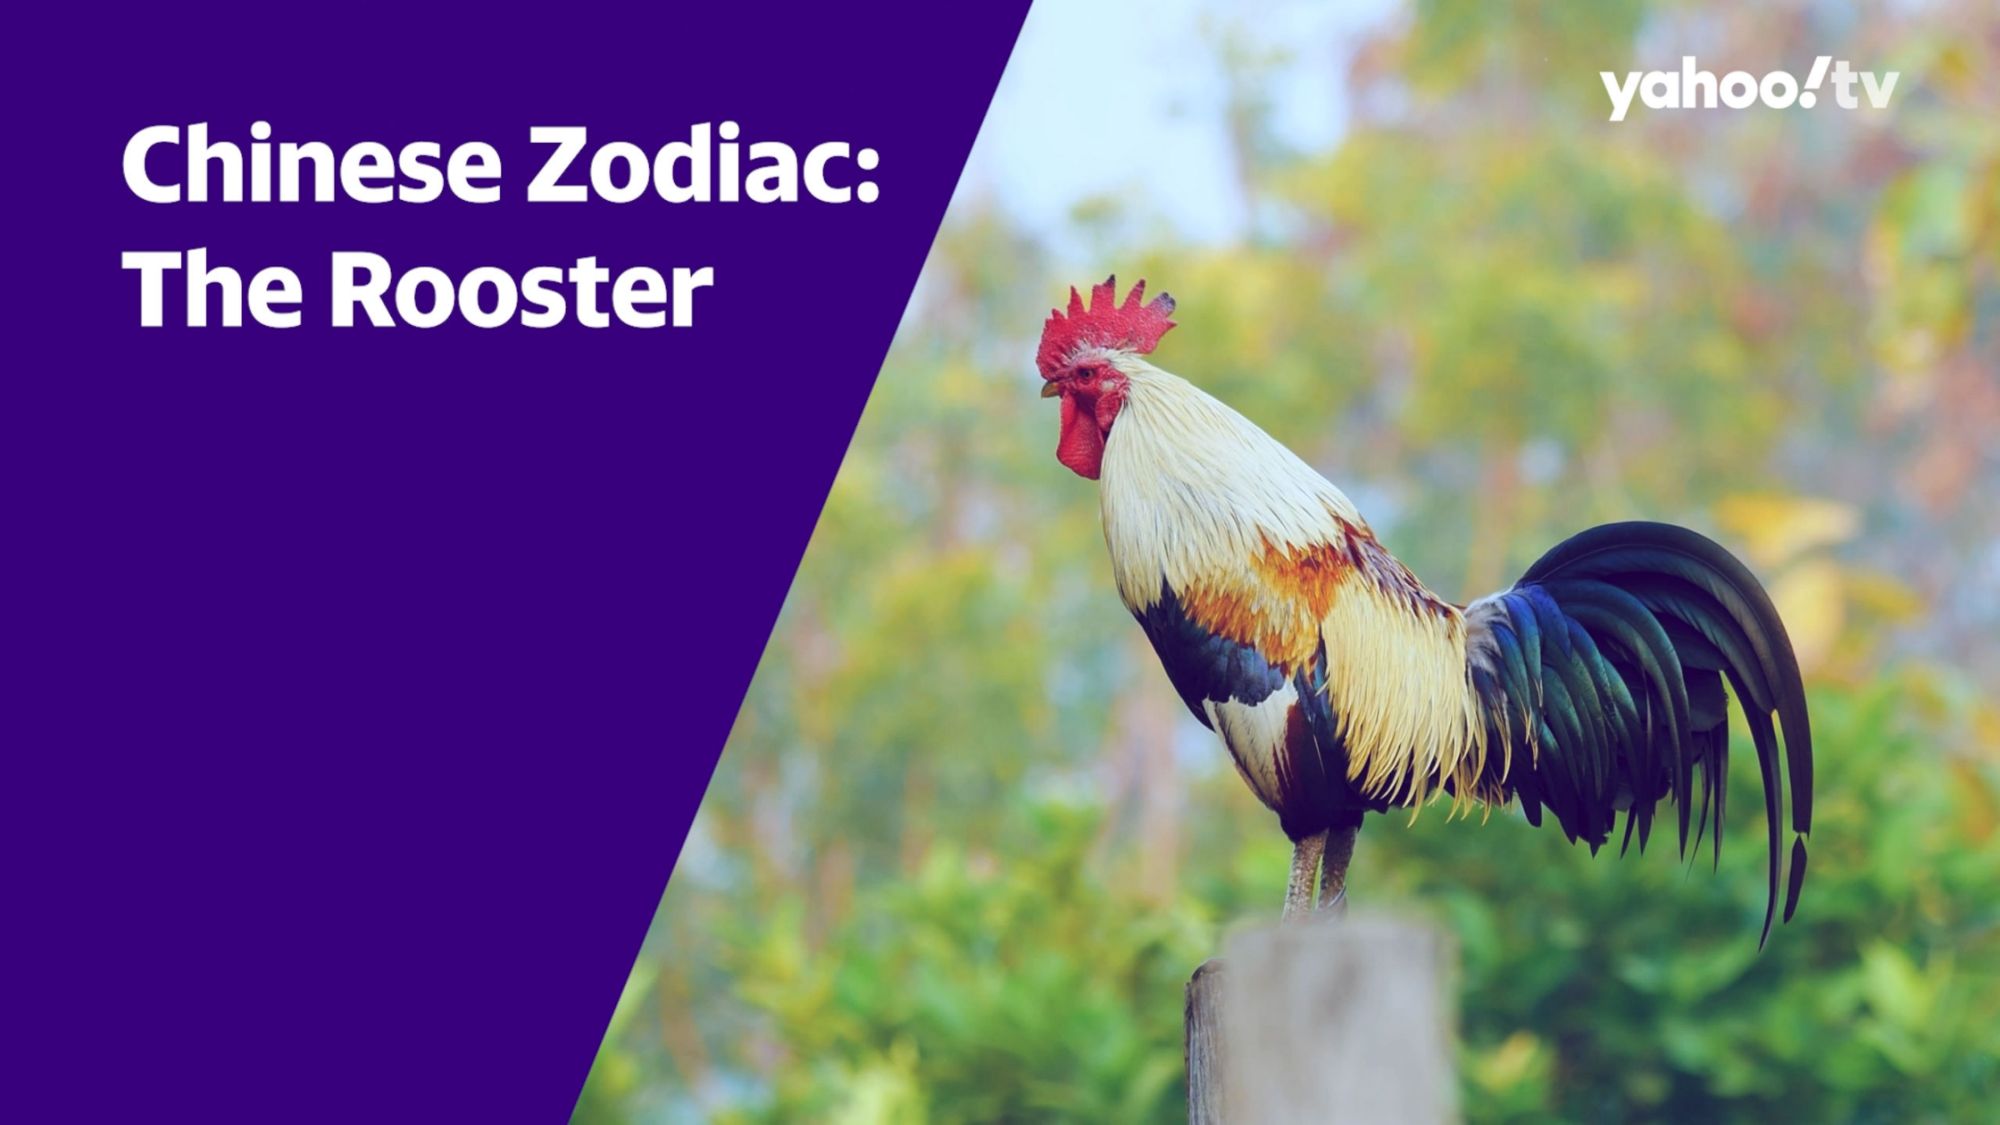 About the Chinese Zodiac: The Rooster